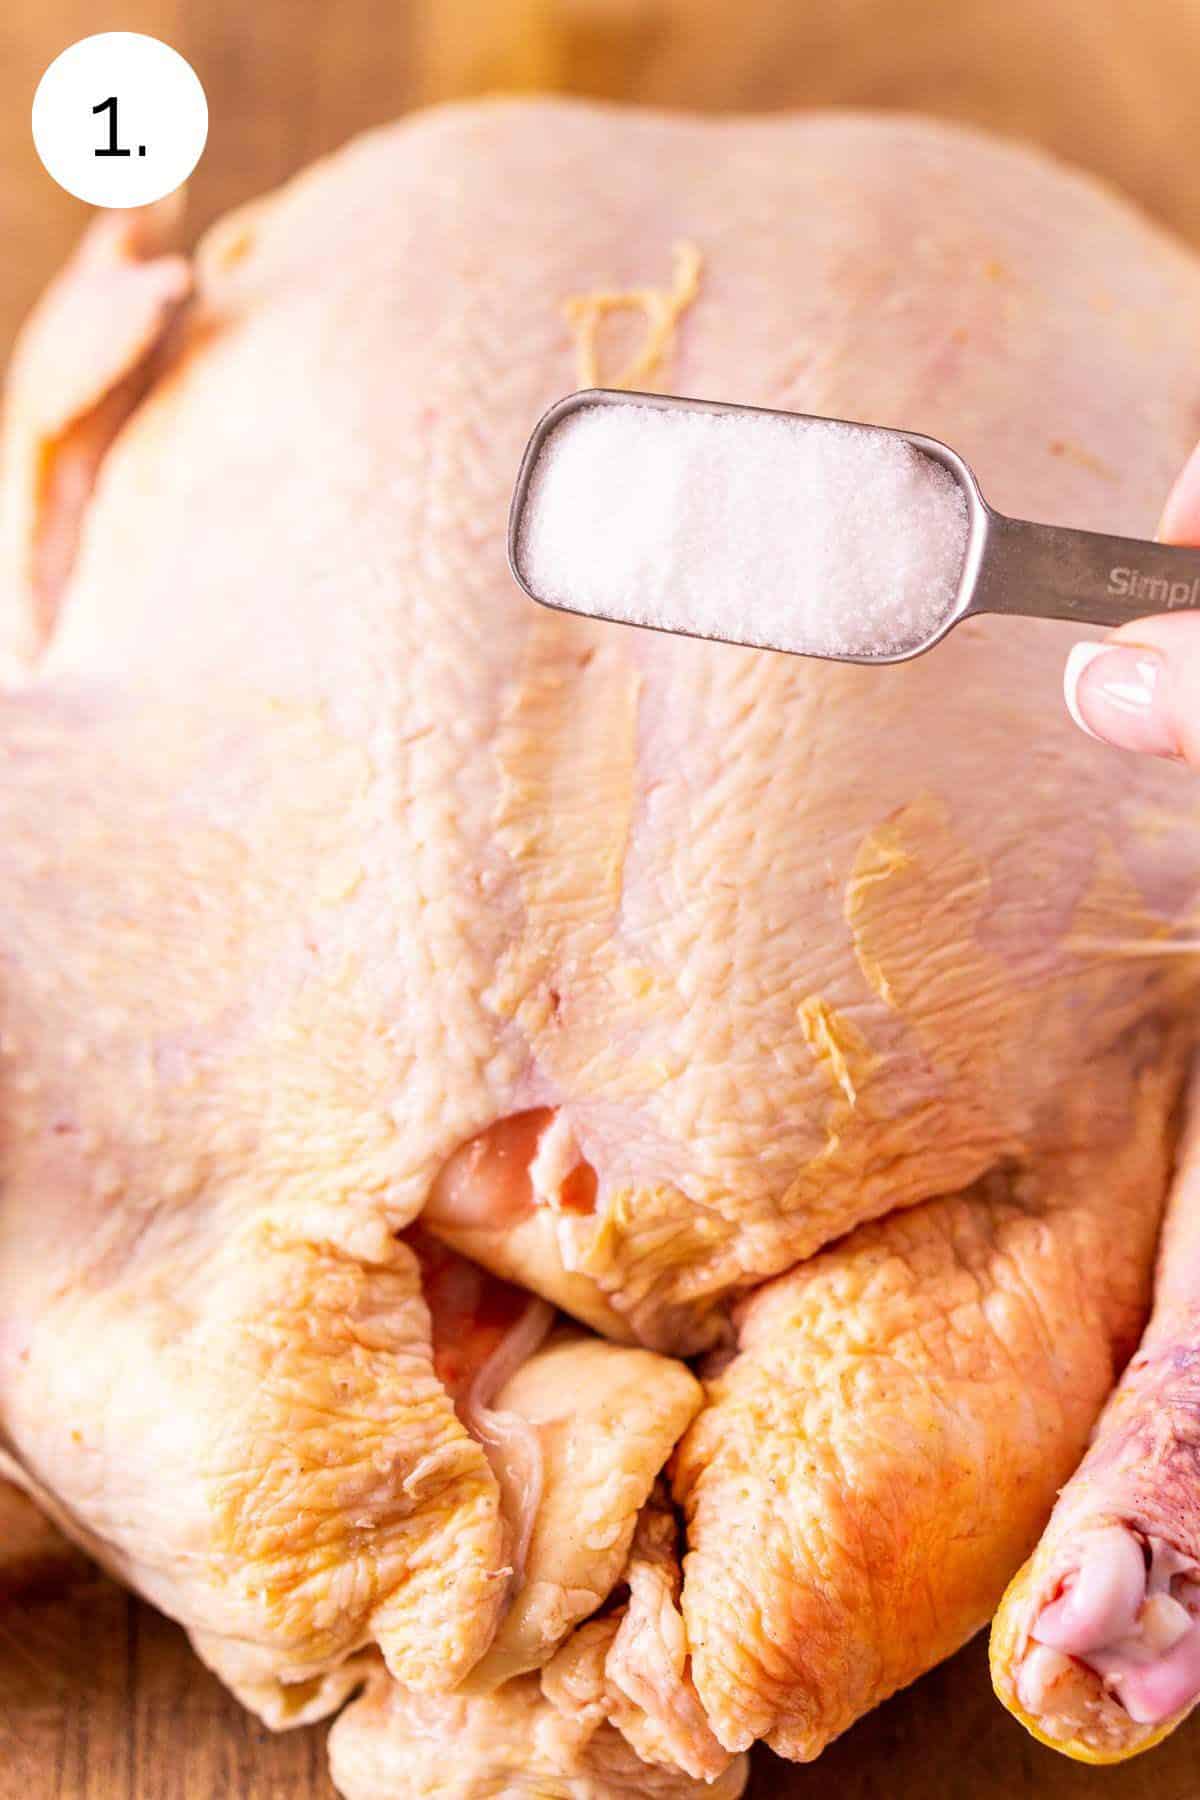 A hand holding a tablespoon over the chicken on a brown cutting board before dry brining the skin.